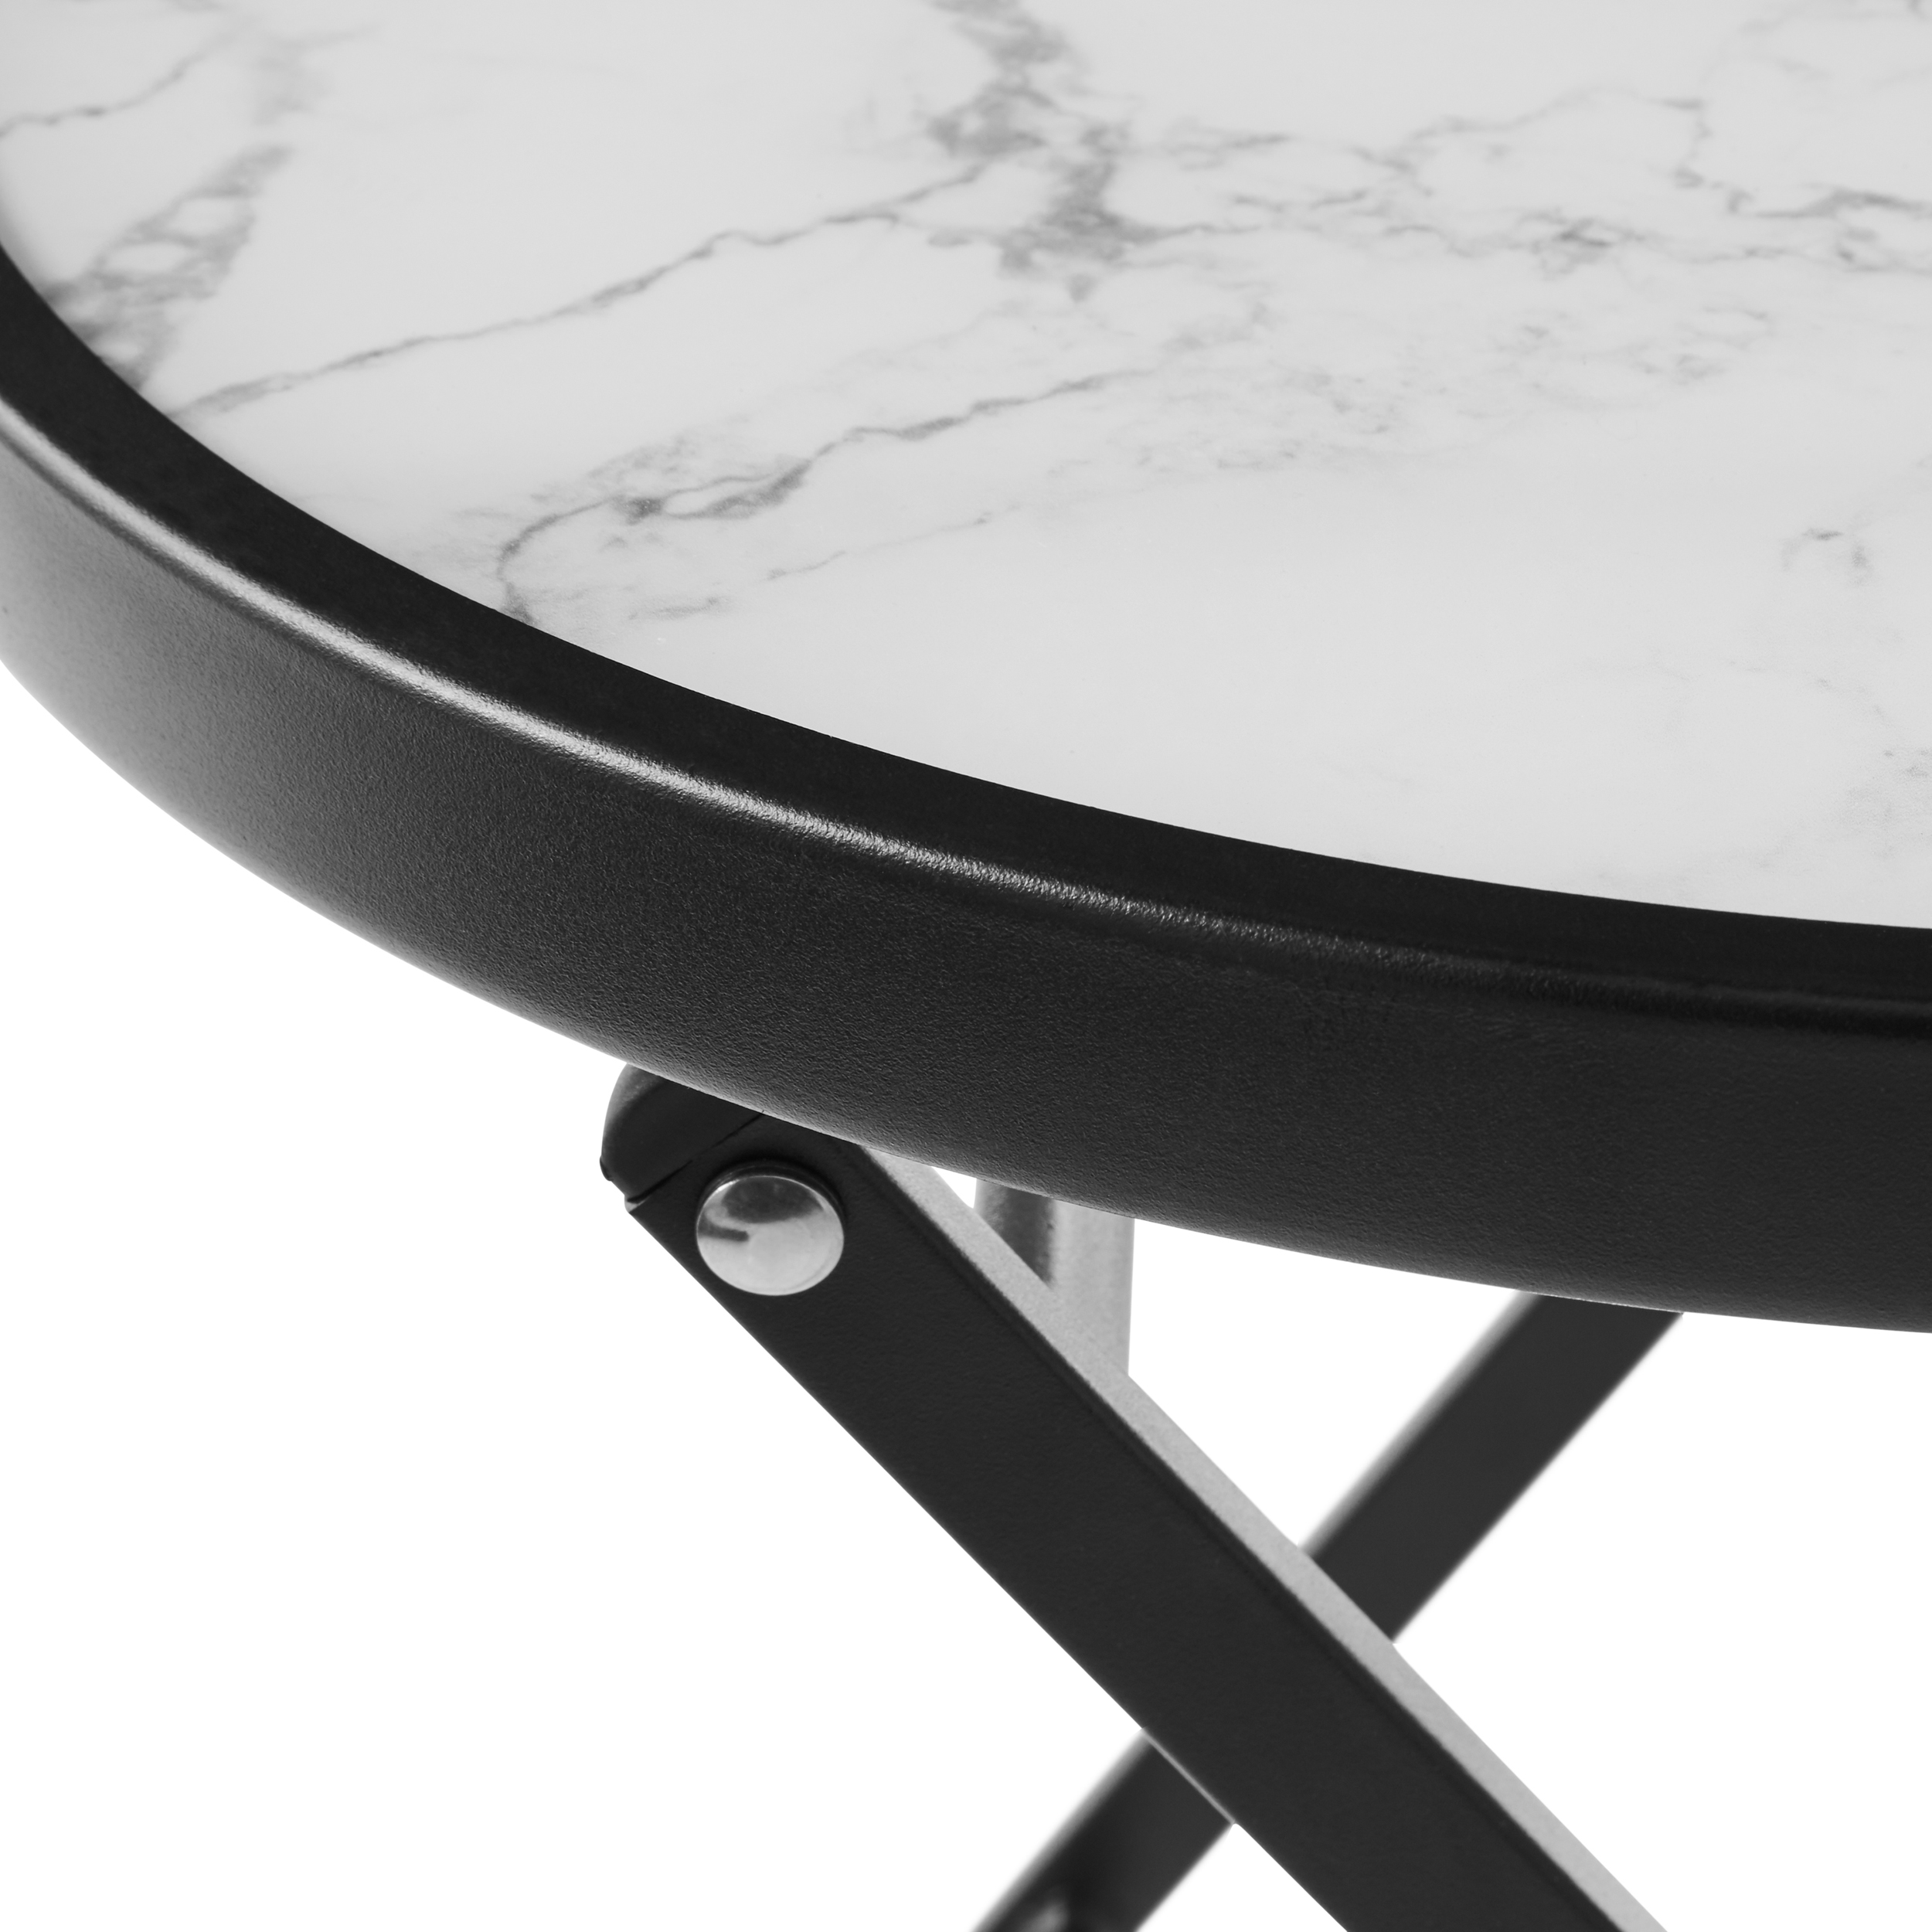 Mainstays 18" Greyson Square White Marble Steel Round Folding Table - image 5 of 7